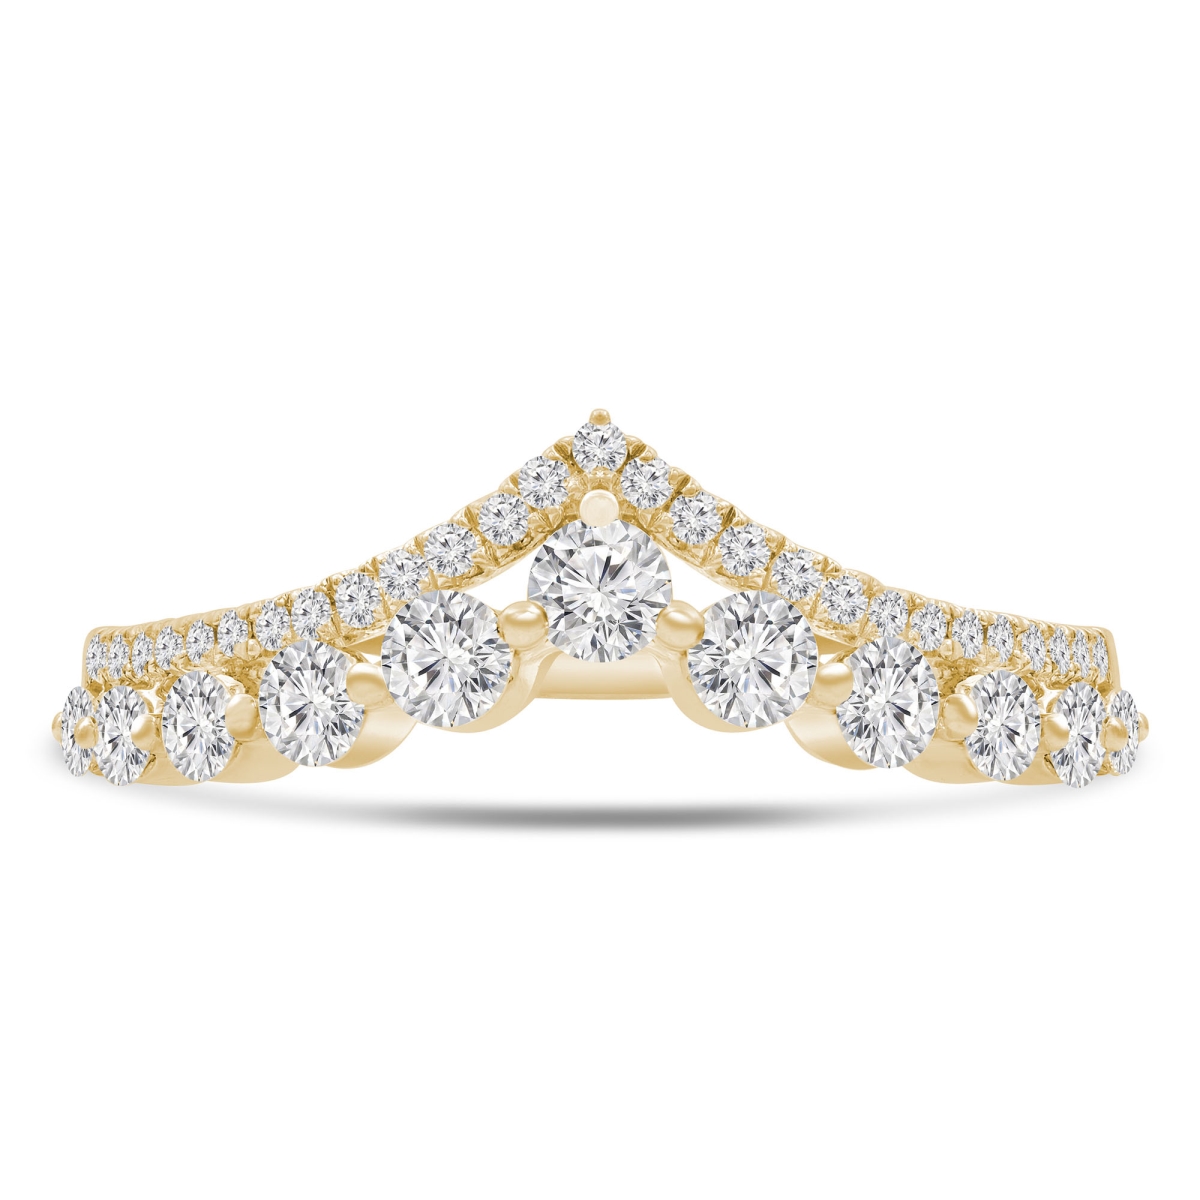 MDR220214-3.5 0.5 CTW Round Diamond Two-Row Tiara Shared Prong Semi-Eternity Anniversary Wedding Band Ring in 14K Yellow Gold - Size 3.5 -  Majesty Diamonds